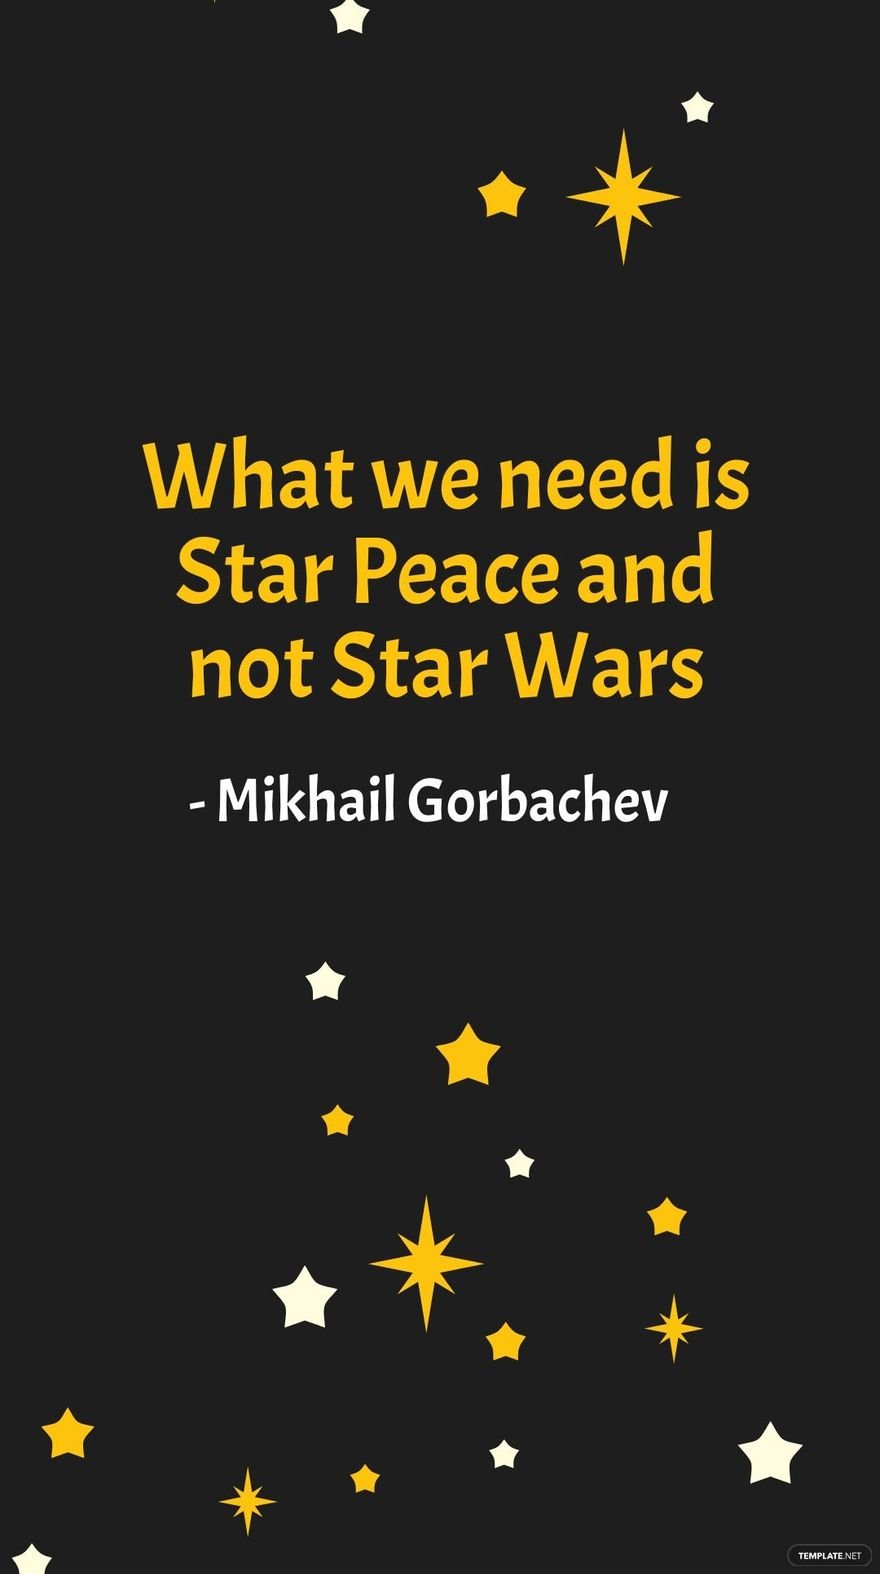 Mikhail Gorbachev - What we need is Star Peace and not Star Wars